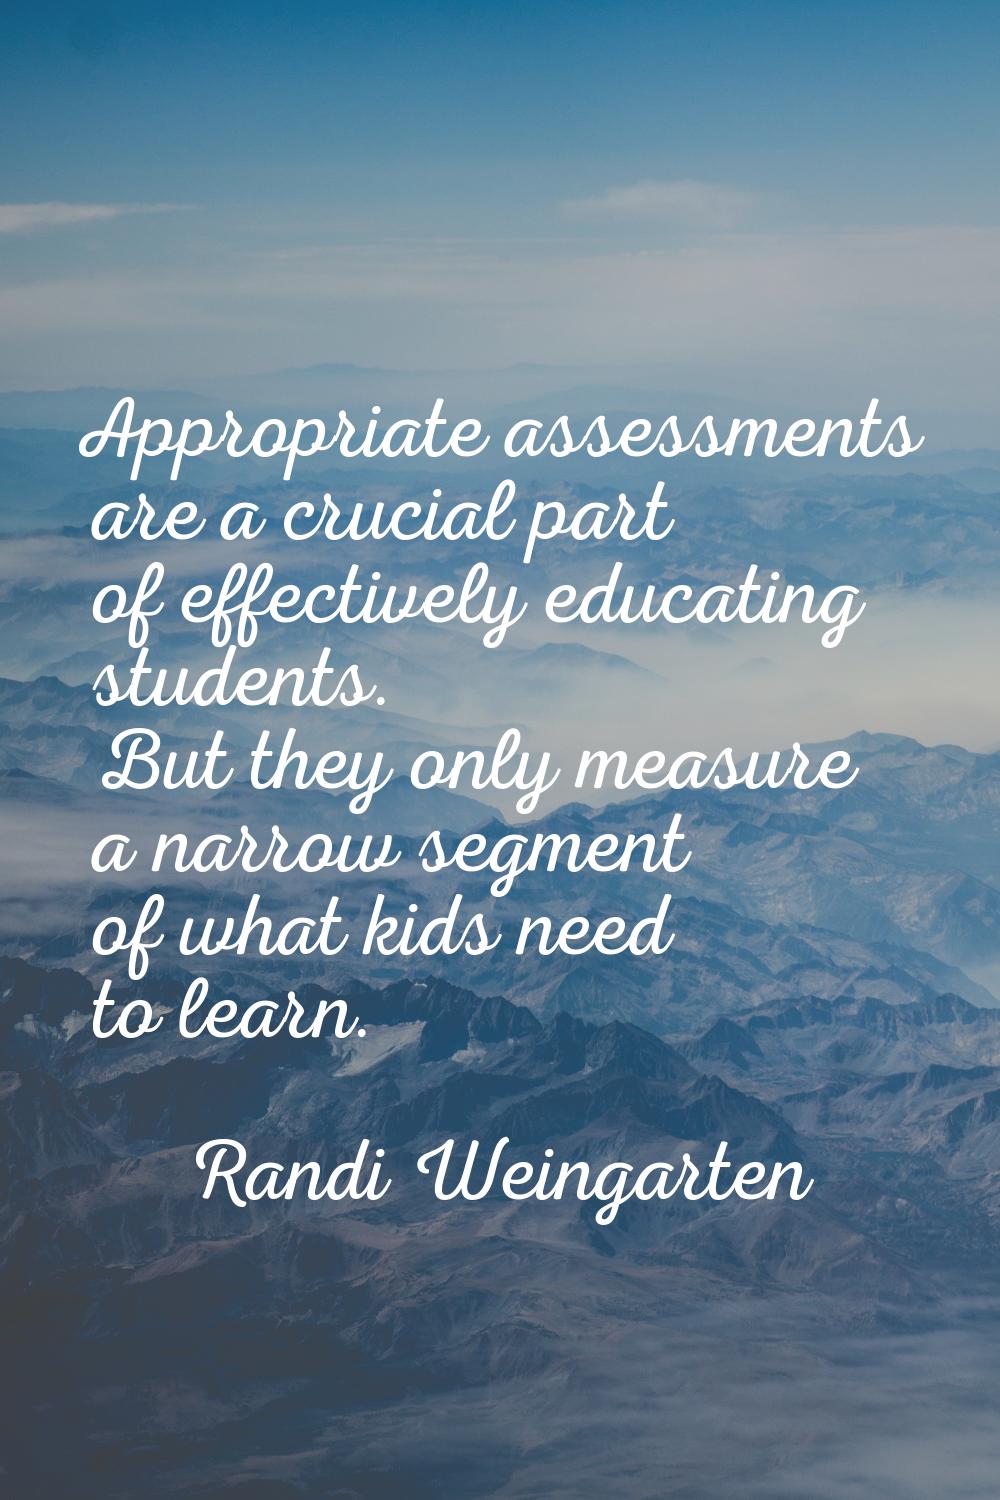 Appropriate assessments are a crucial part of effectively educating students. But they only measure